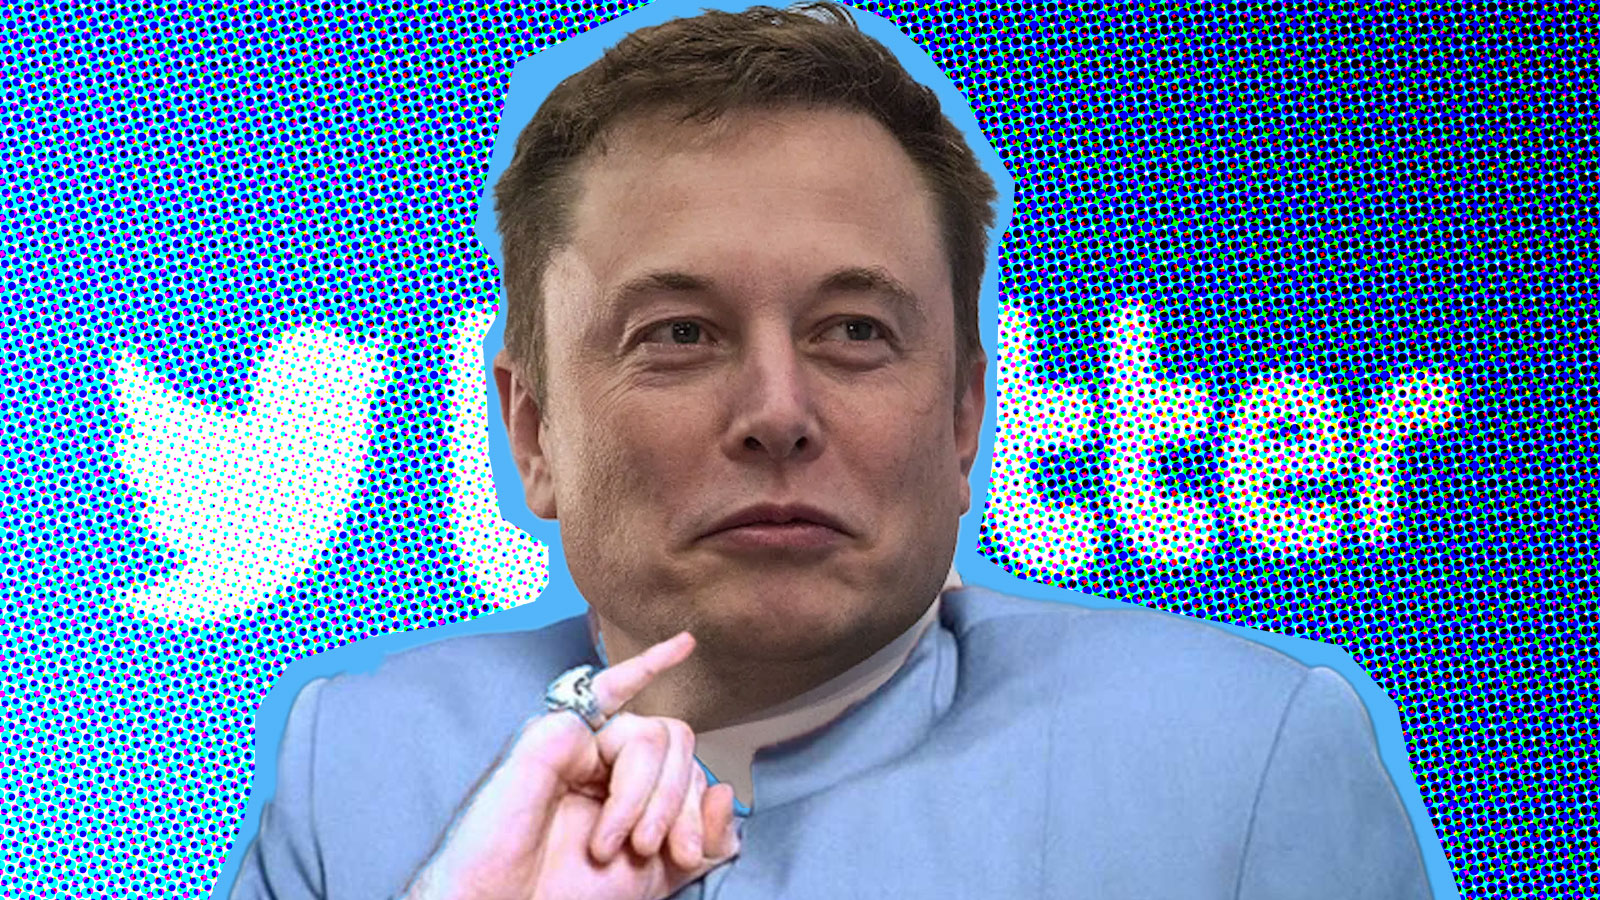 Elon Musk Is Planning To Replace All Social Media With ‘Everything App’